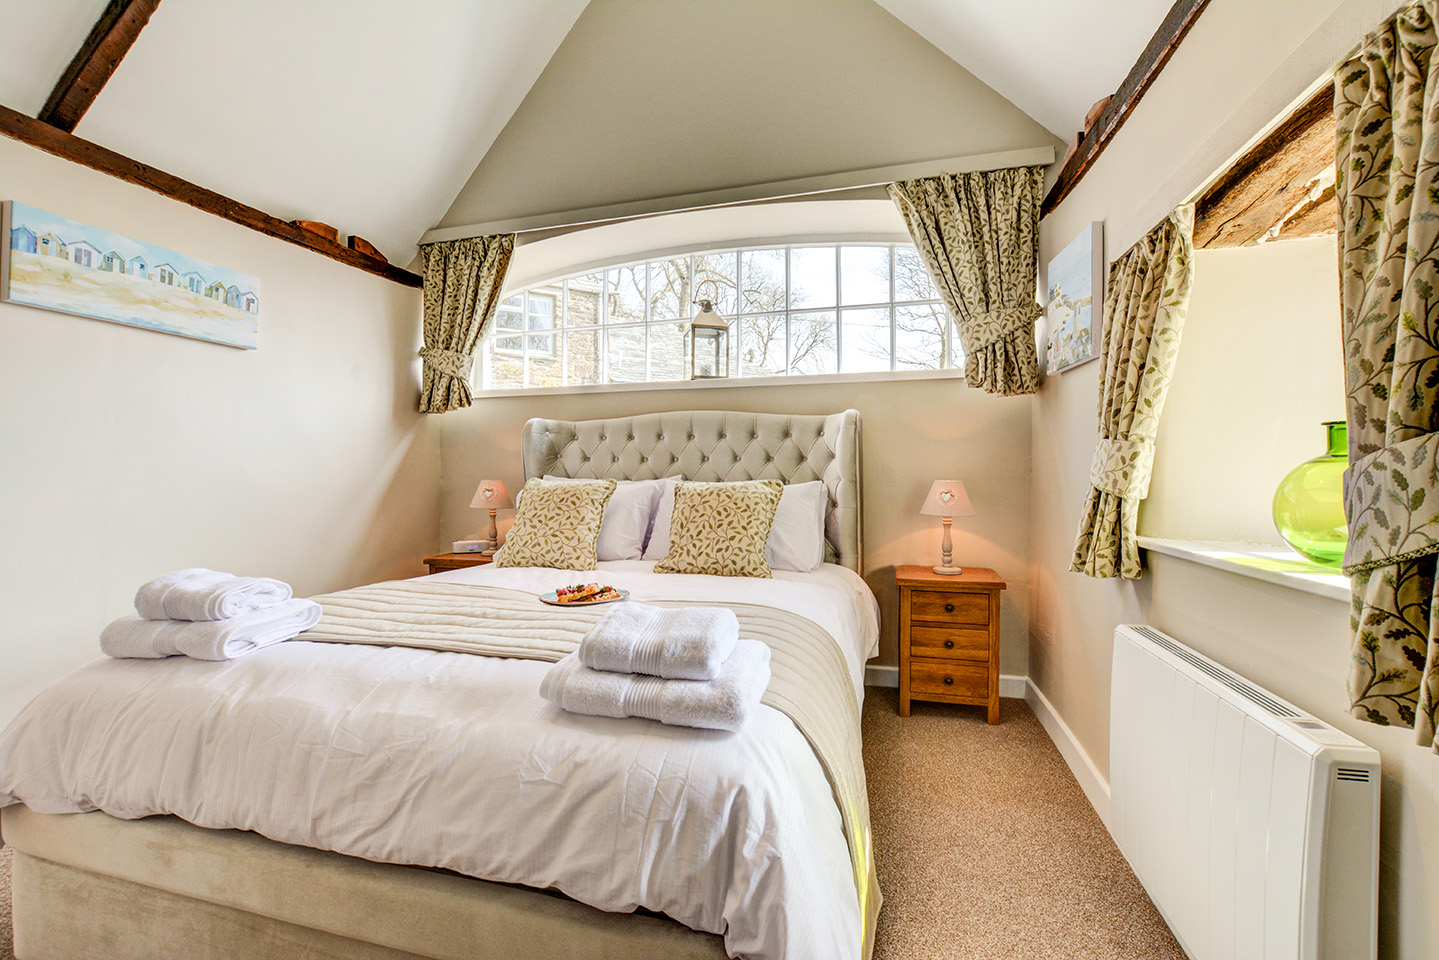 The bedroom at Jingles luxury self catering holiday cottage at Penrose Burden in North Cornwall near Bodmin Moor01.jpg